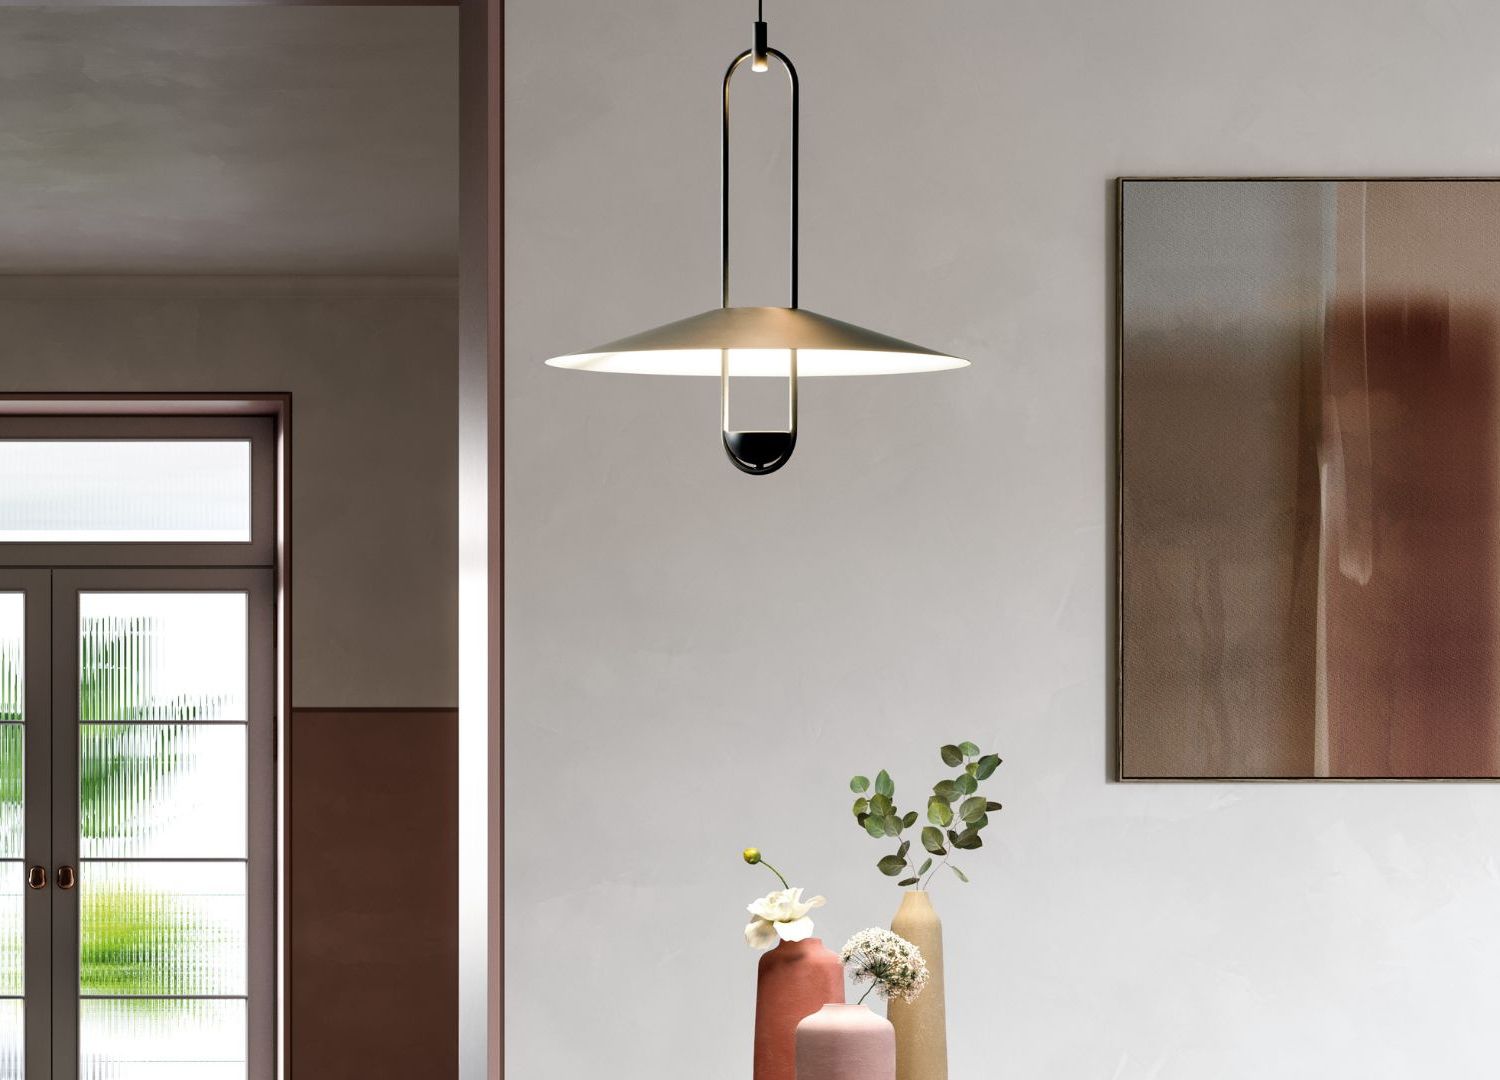 Luppiter lighting collection by Marco Zito for Masiero (5)